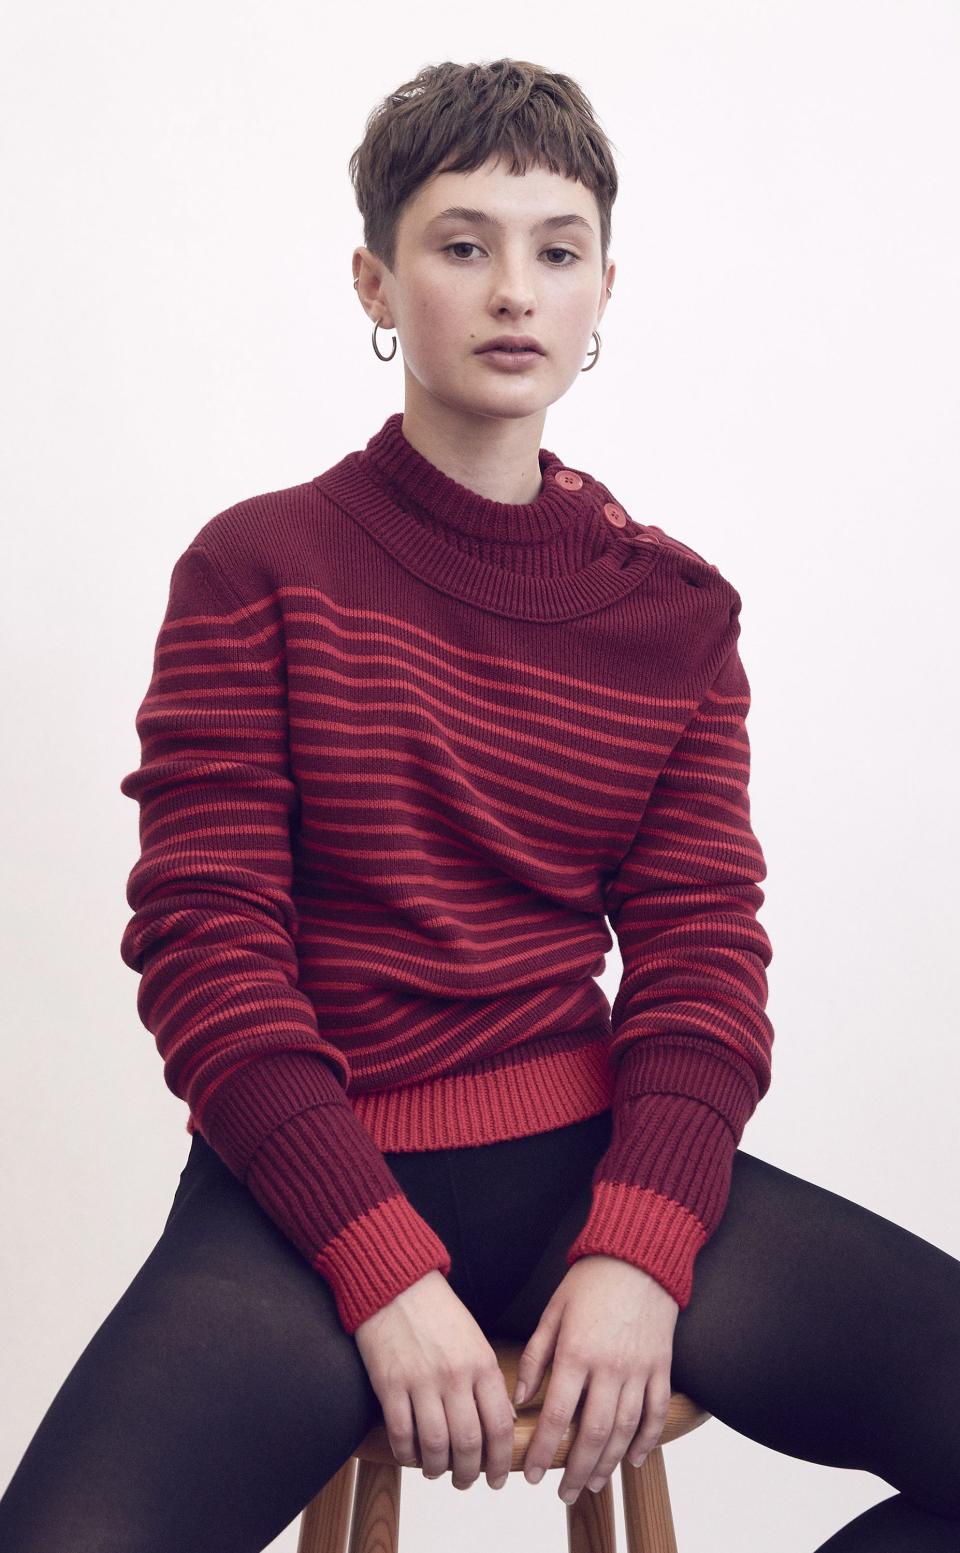 Tuva Bjarme in a striped recycled- and organic-wool sweater.